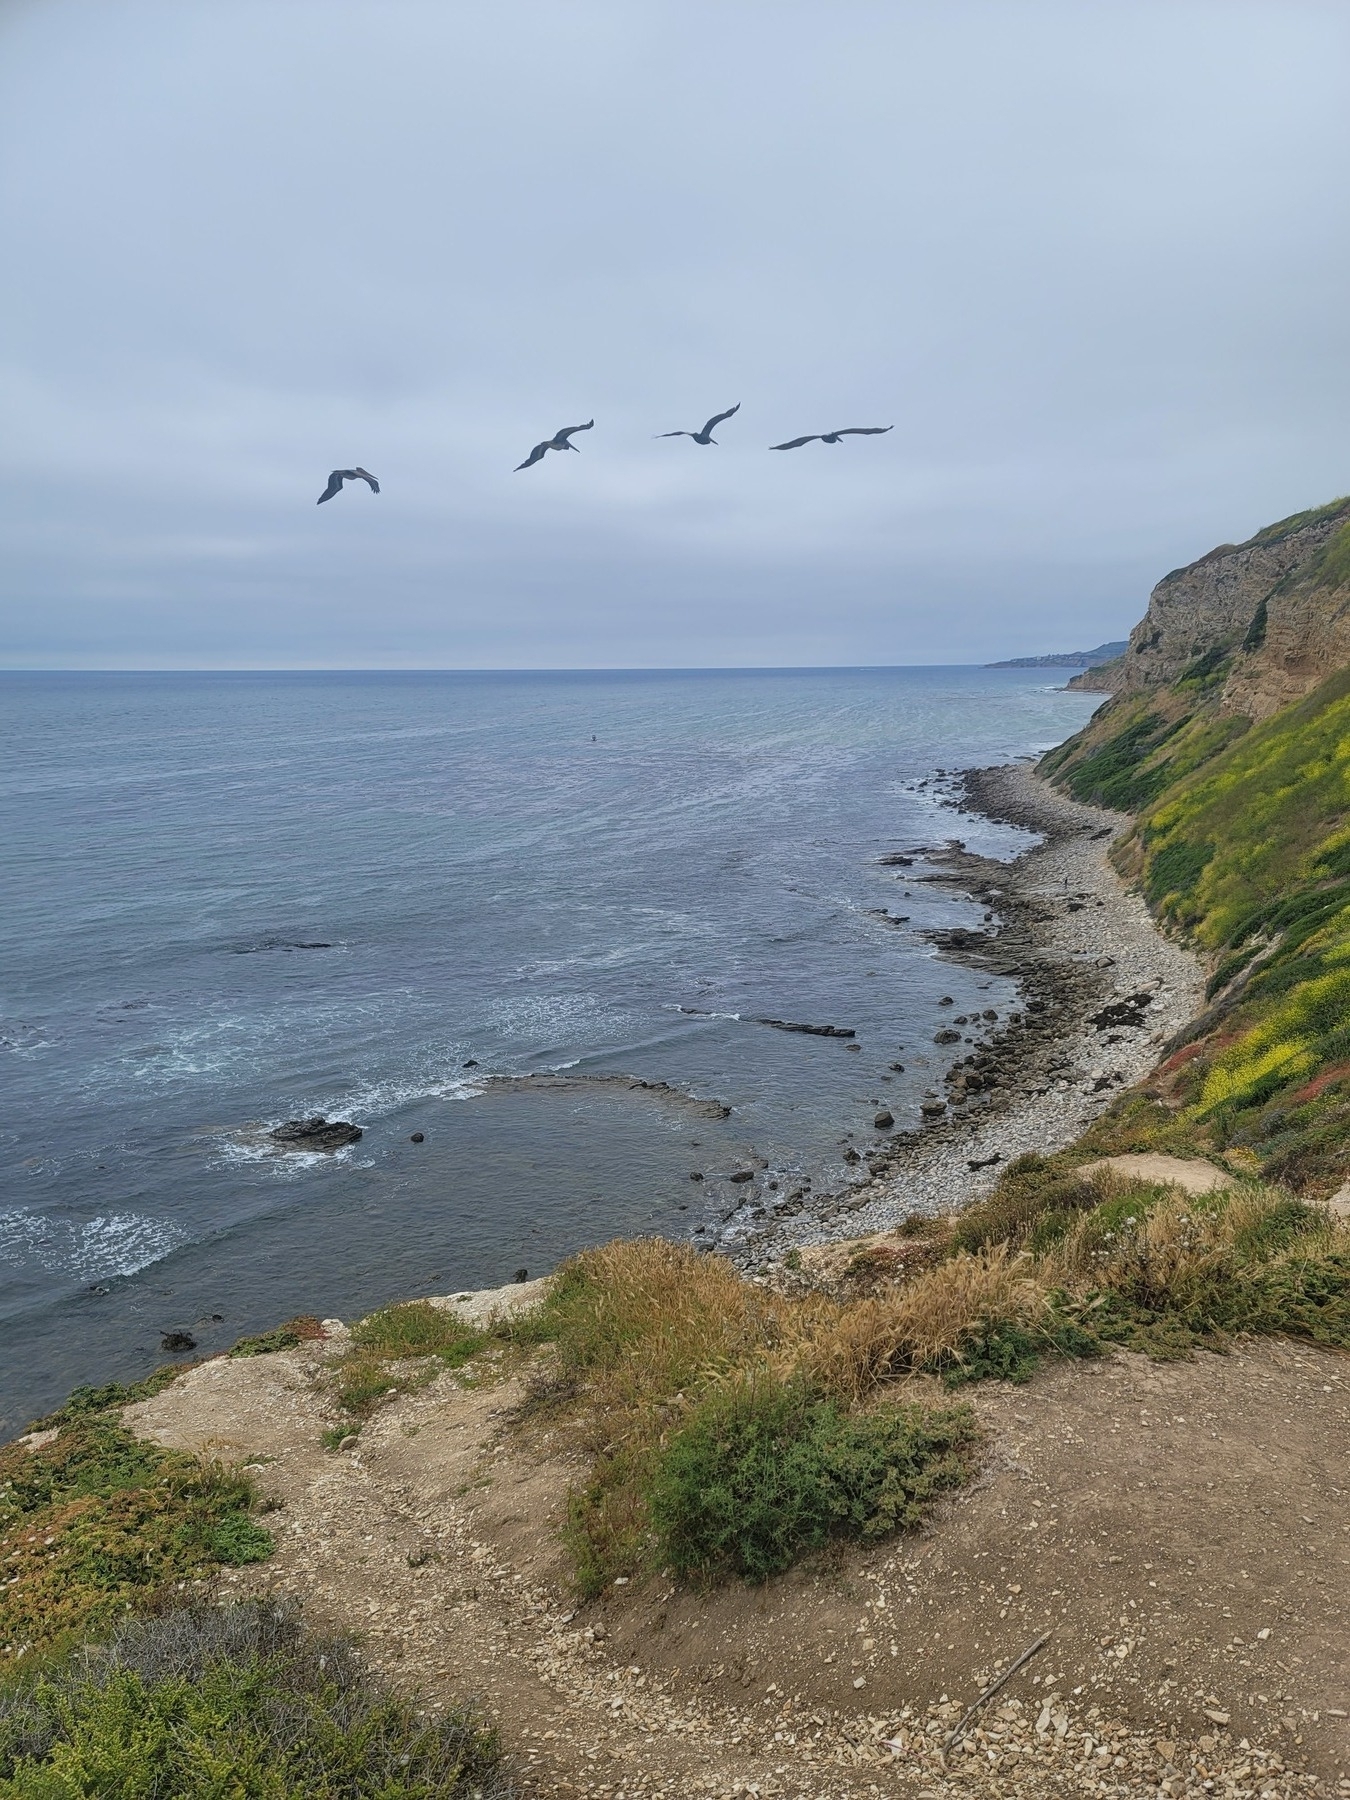 Pacific coastline with a rocky beach and green cliffs. four seagulls flying in the sky